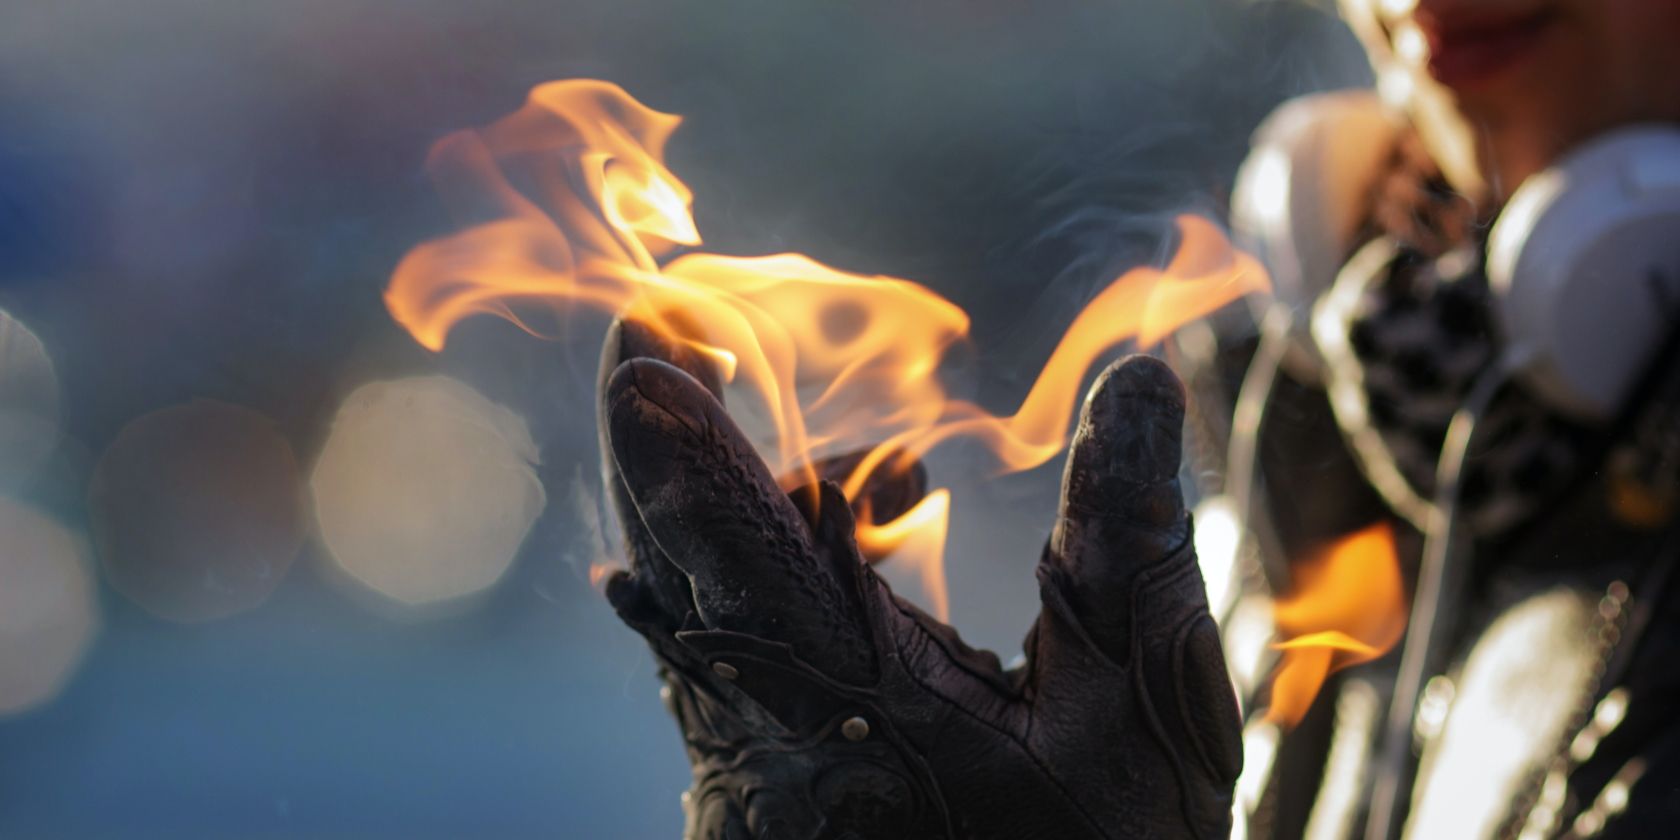 a person weraing headphones holds fire in a gloved hand